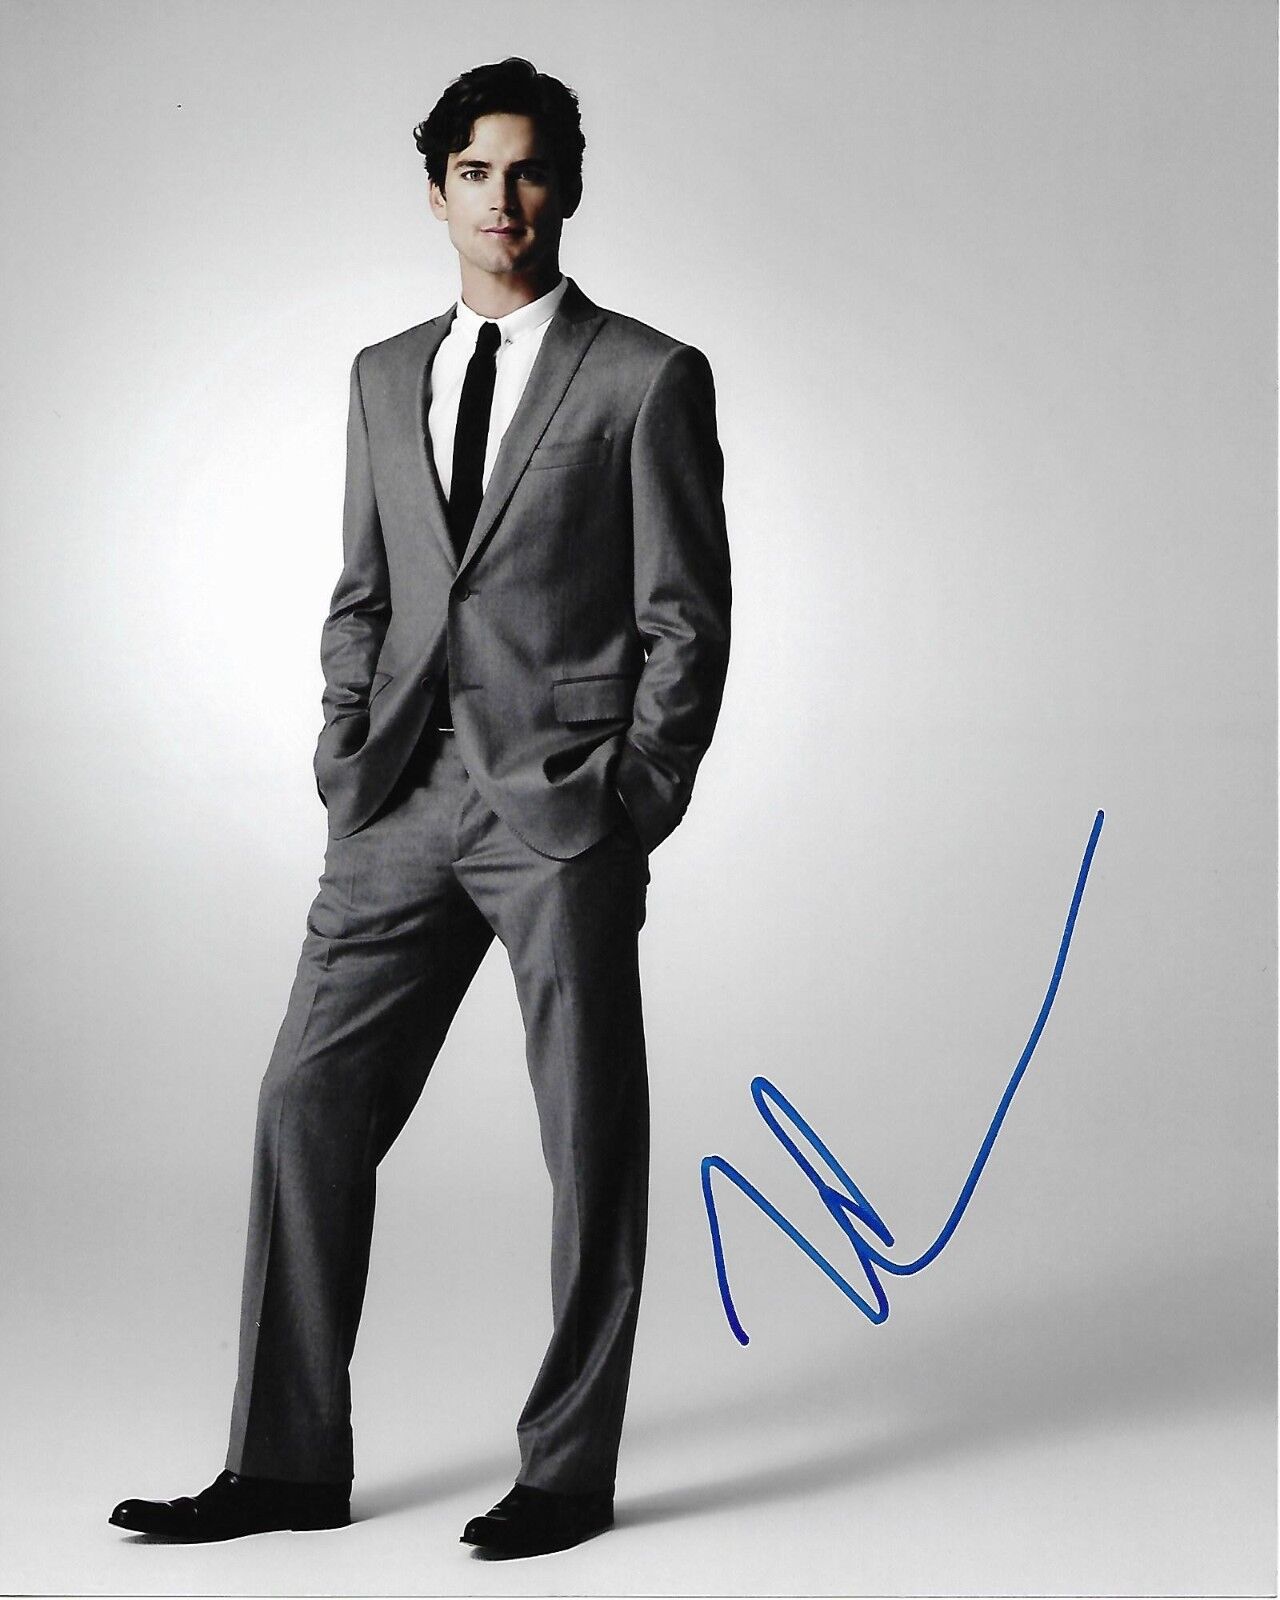 MATT BOMER WHITE COLLAR AUTOGRAPHED Photo Poster painting SIGNED 8X10 #3 NEAL CAFFREY